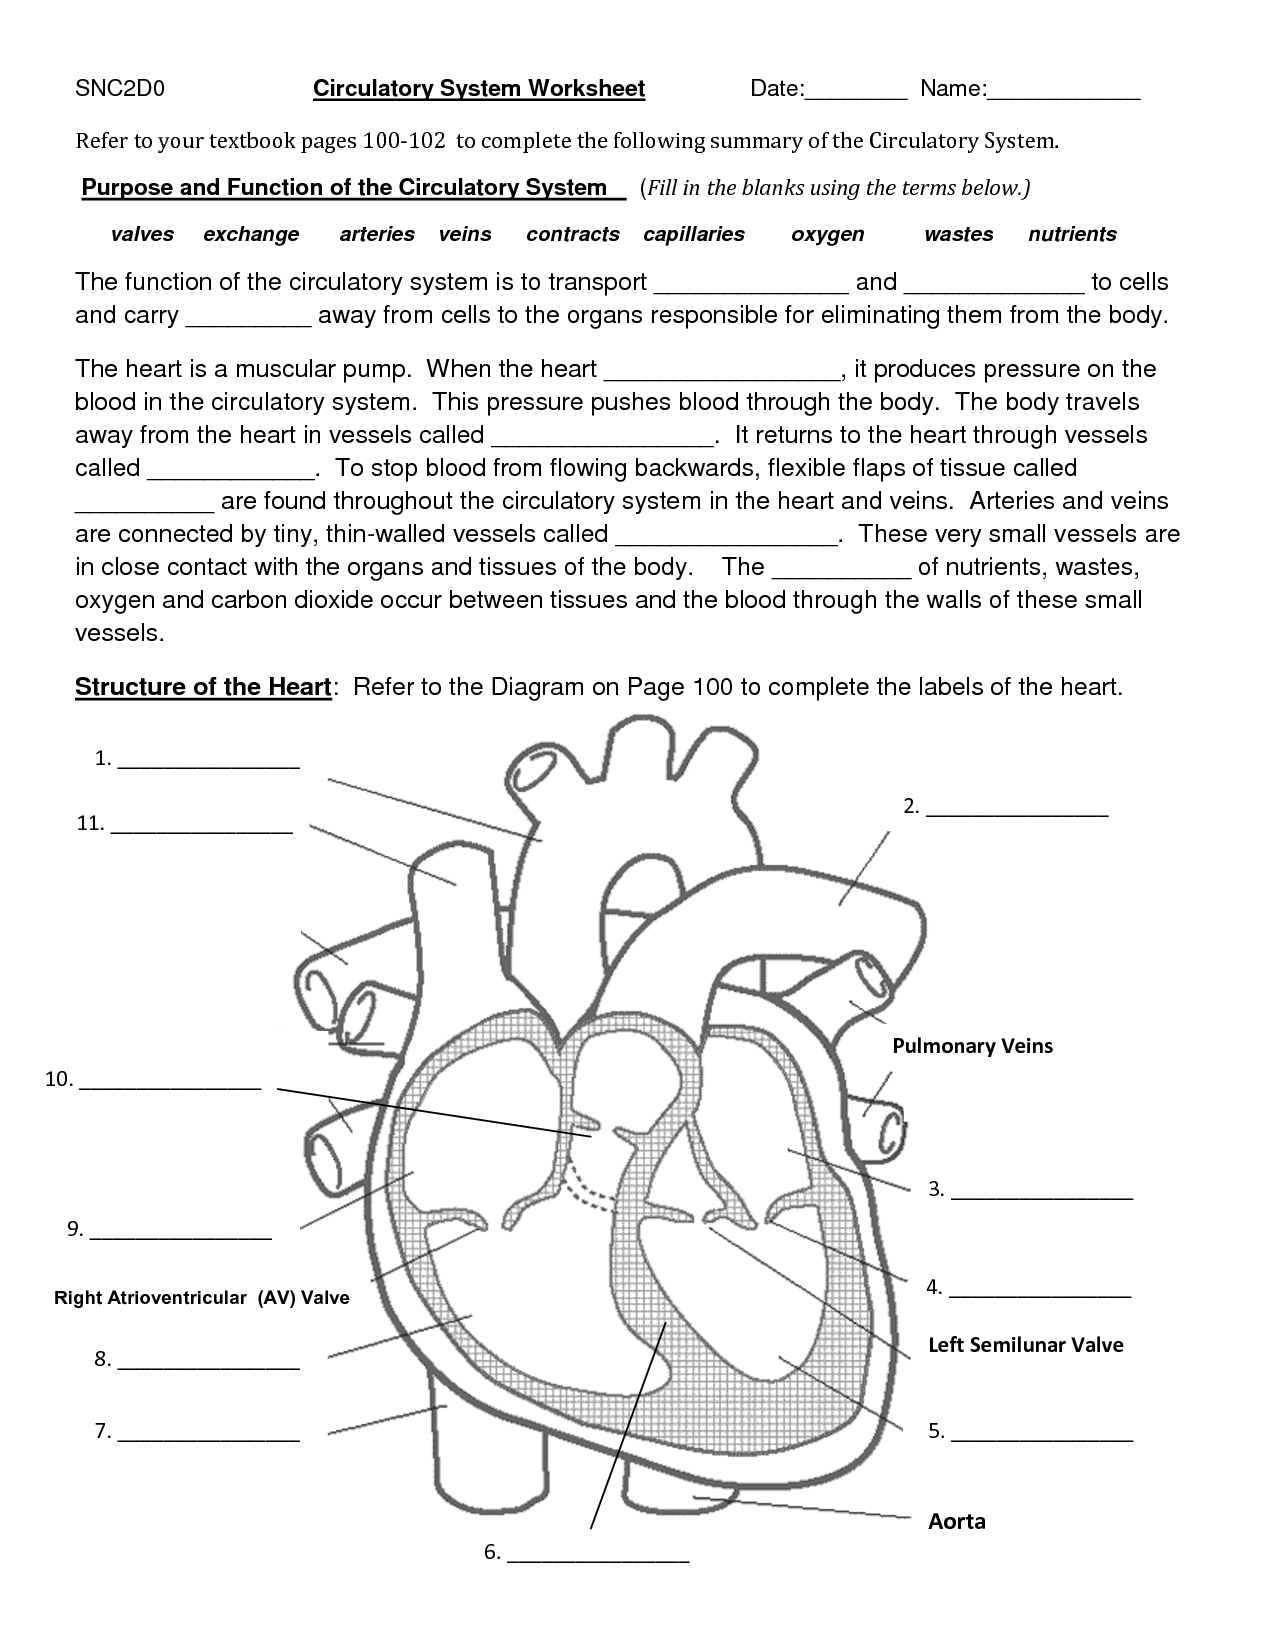 14 Best Images Of Blank Fill In The Circulatory System Worksheet Answer Key Circulatory System 